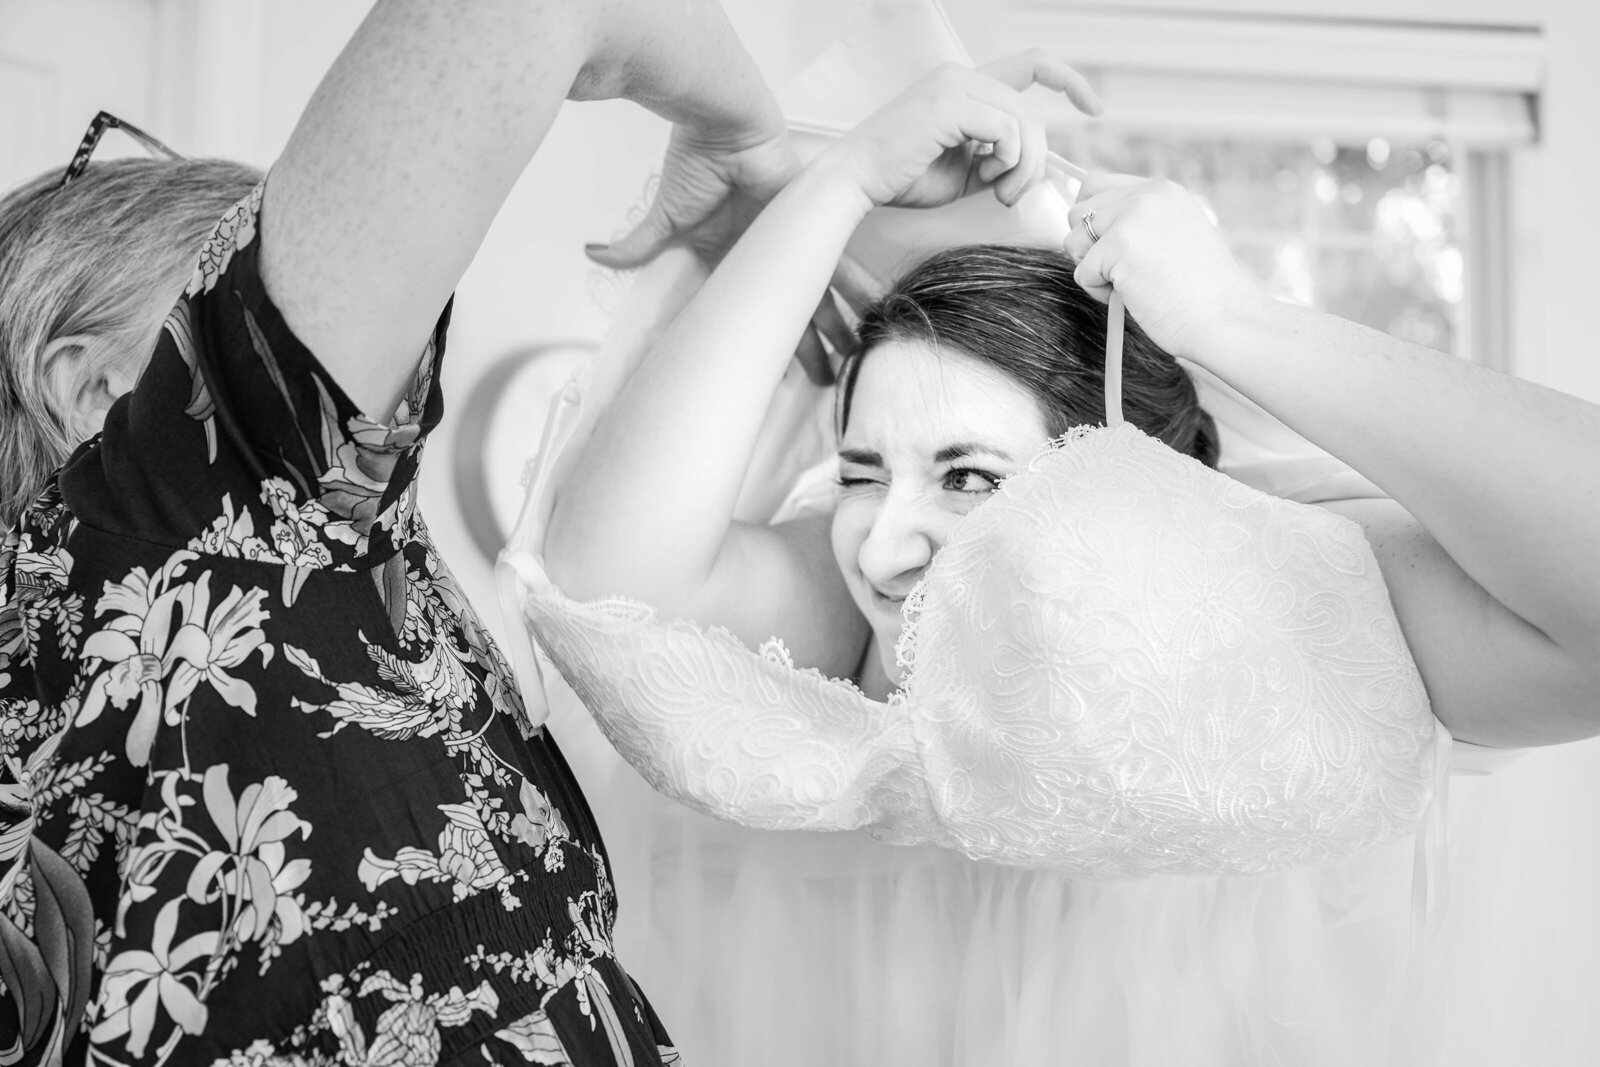 Funny moment as the bride gets her dress on before the wedding.